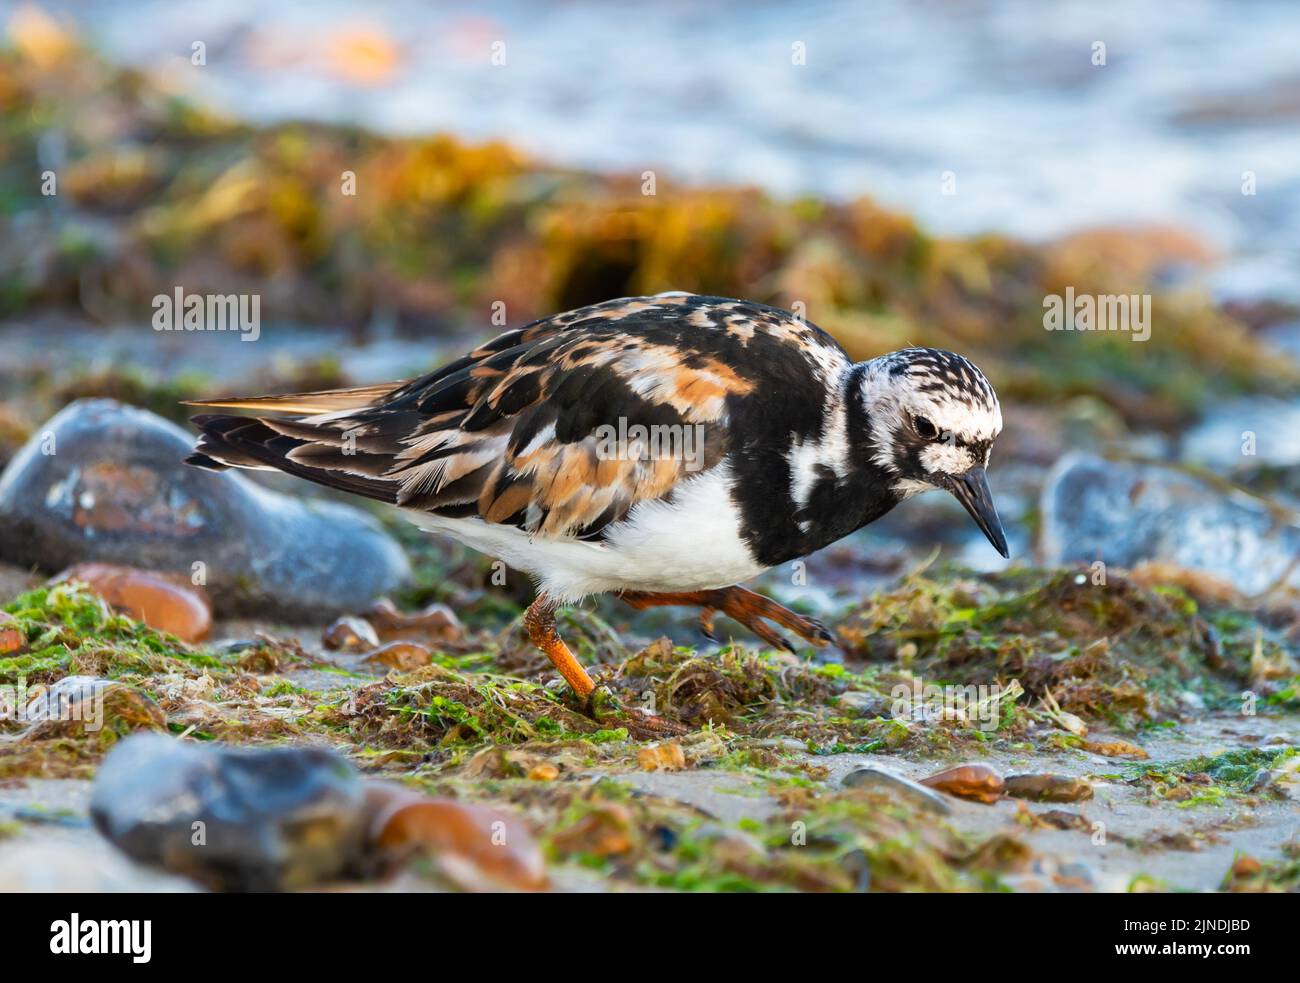 Turnstone bird (Arenaria interpres) standing amongst pebbles and stones on a shingle beach at low tide in England, UK. Stock Photo